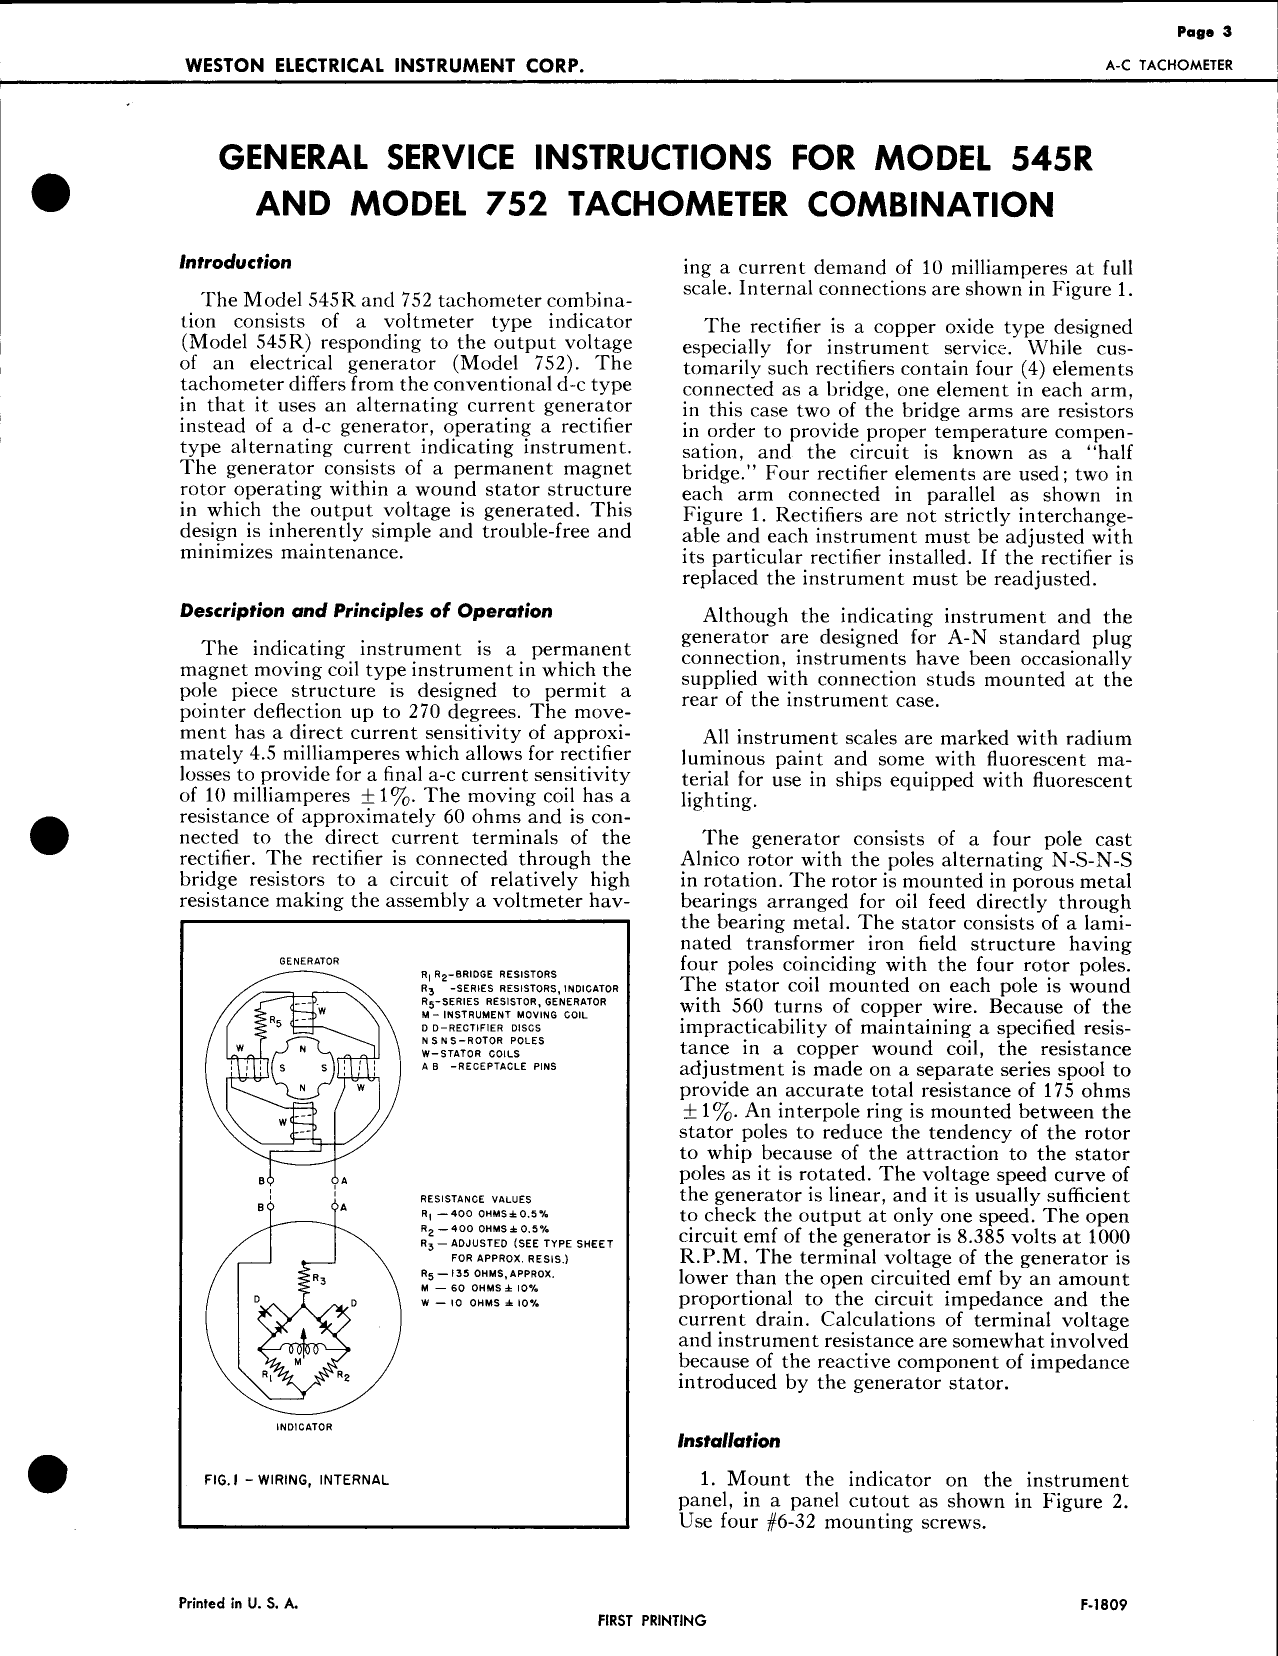 Sample page 3 from AirCorps Library document: Service Instructions for A-C Tachometer Model 752 Mag & 545R Indicator